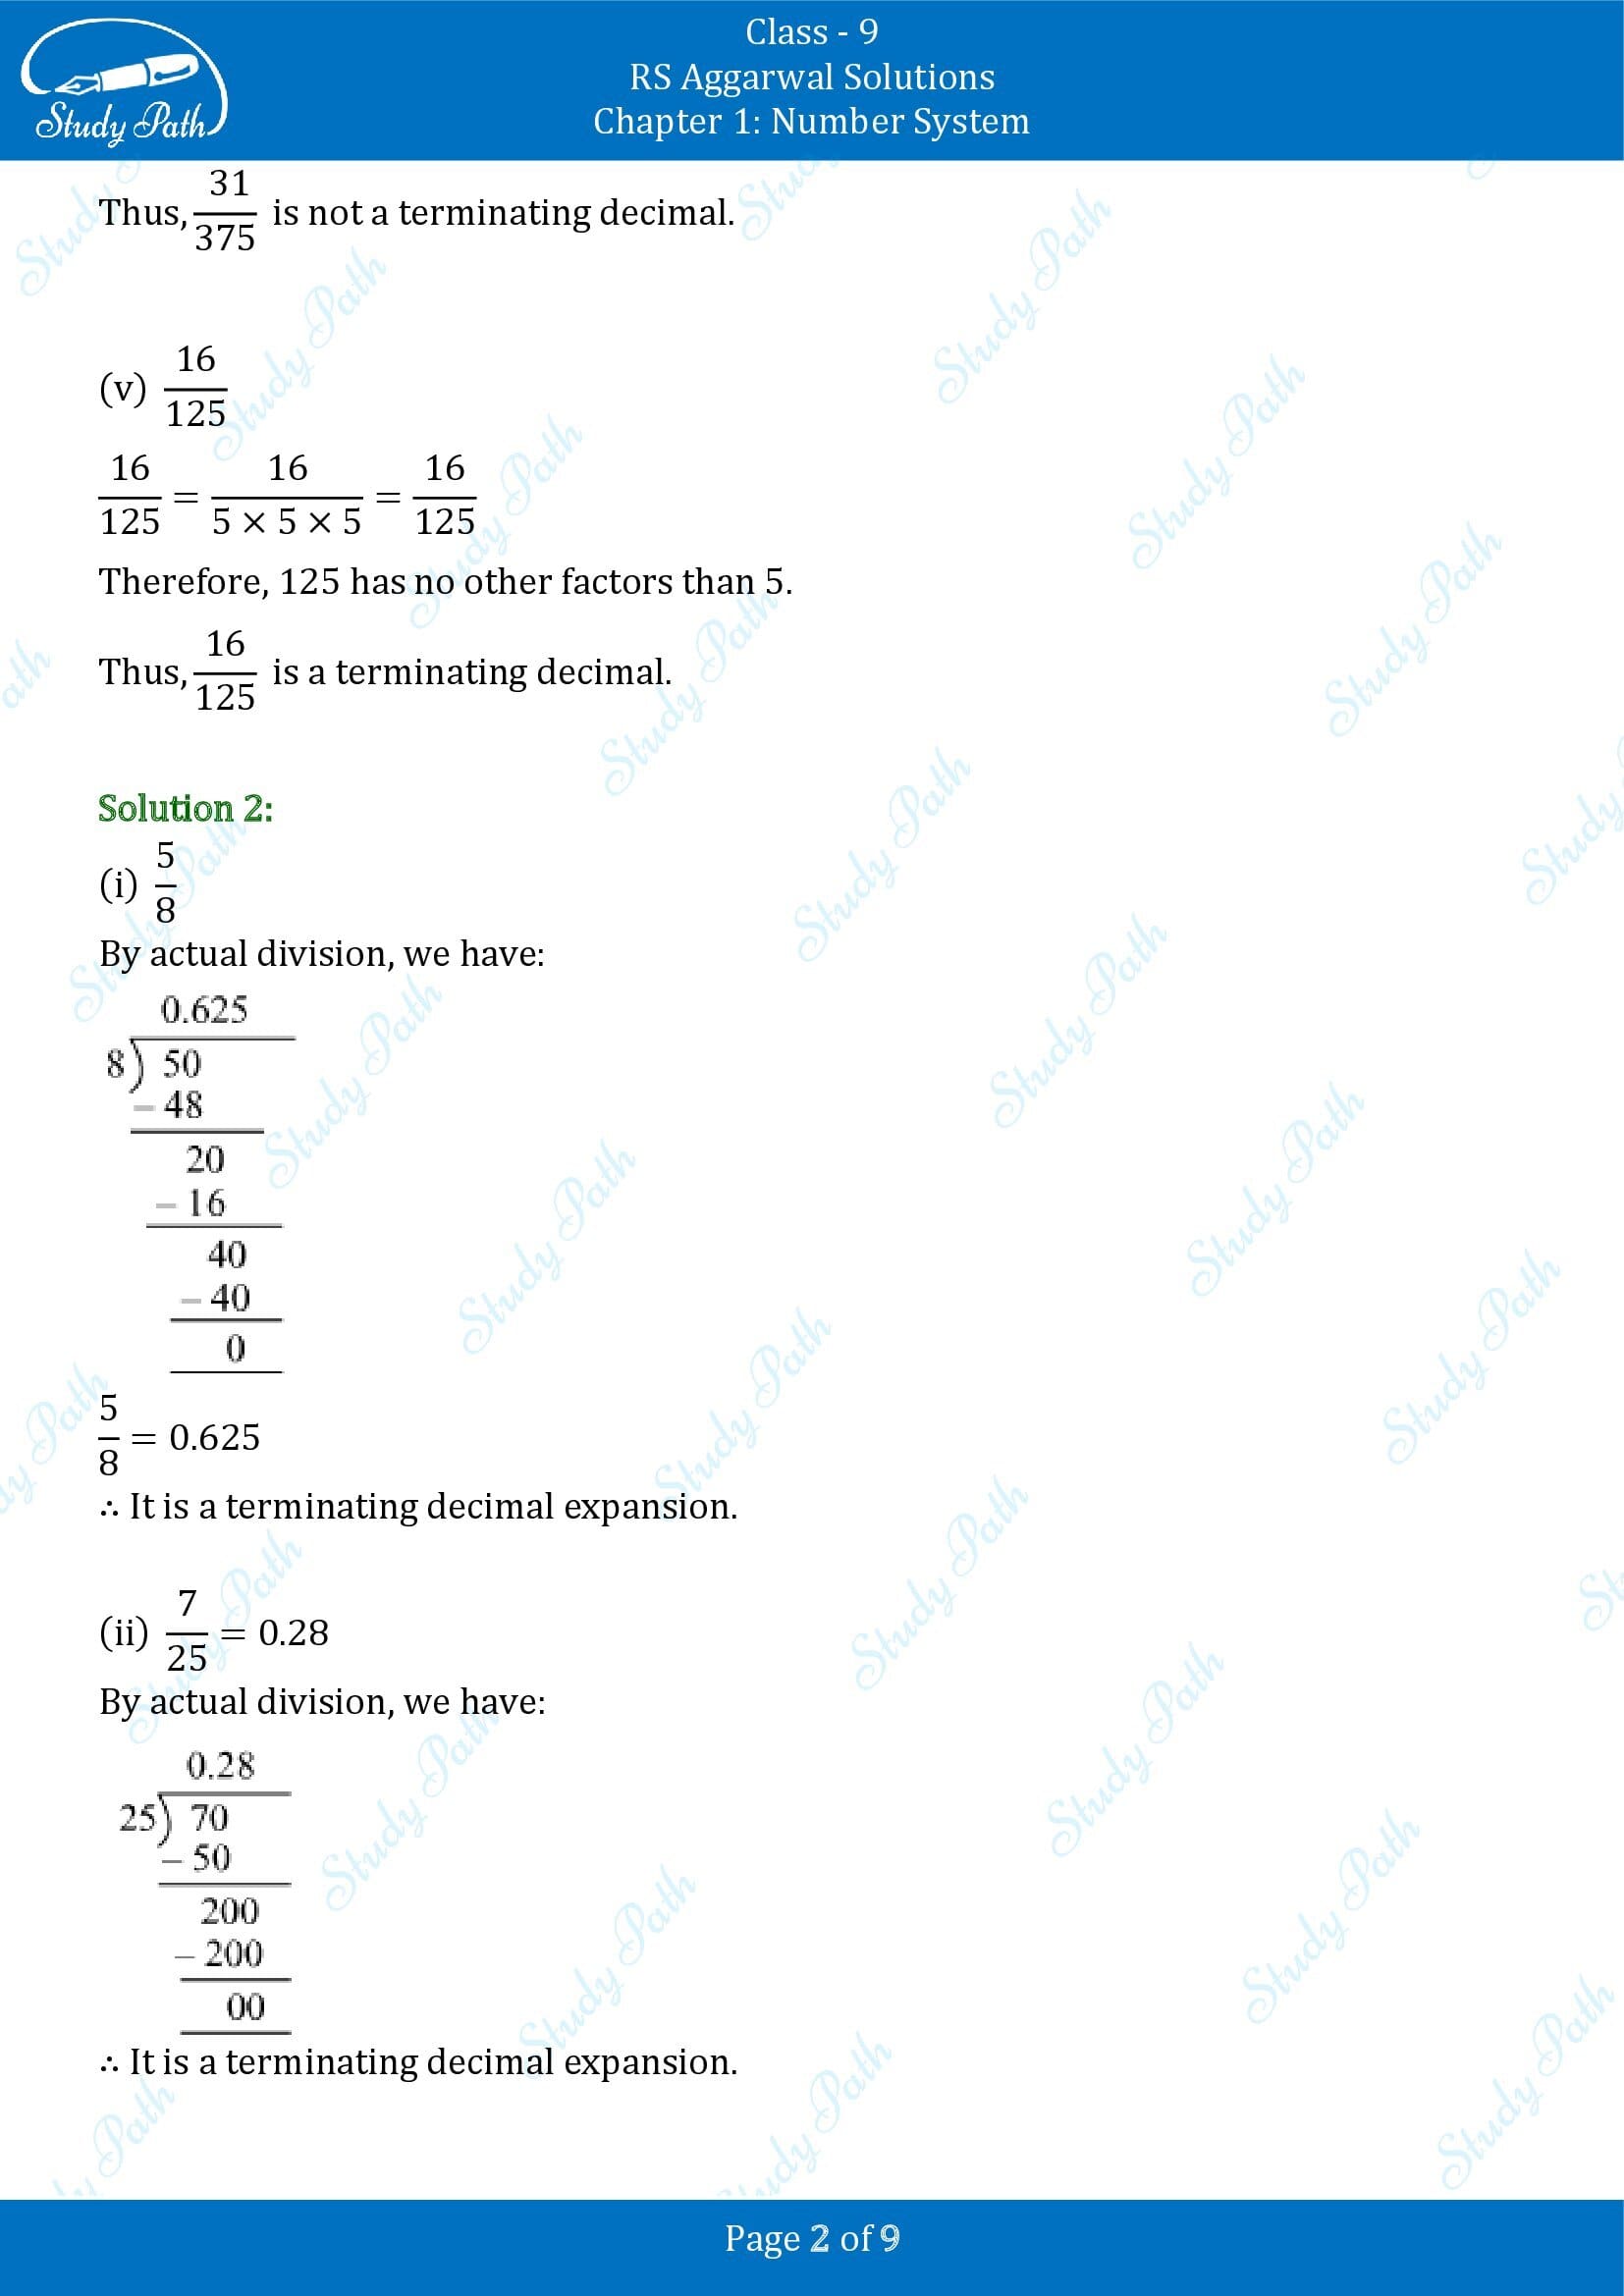 RS Aggarwal Solutions Class 9 Chapter 1 Number System Exercise 1B 00002